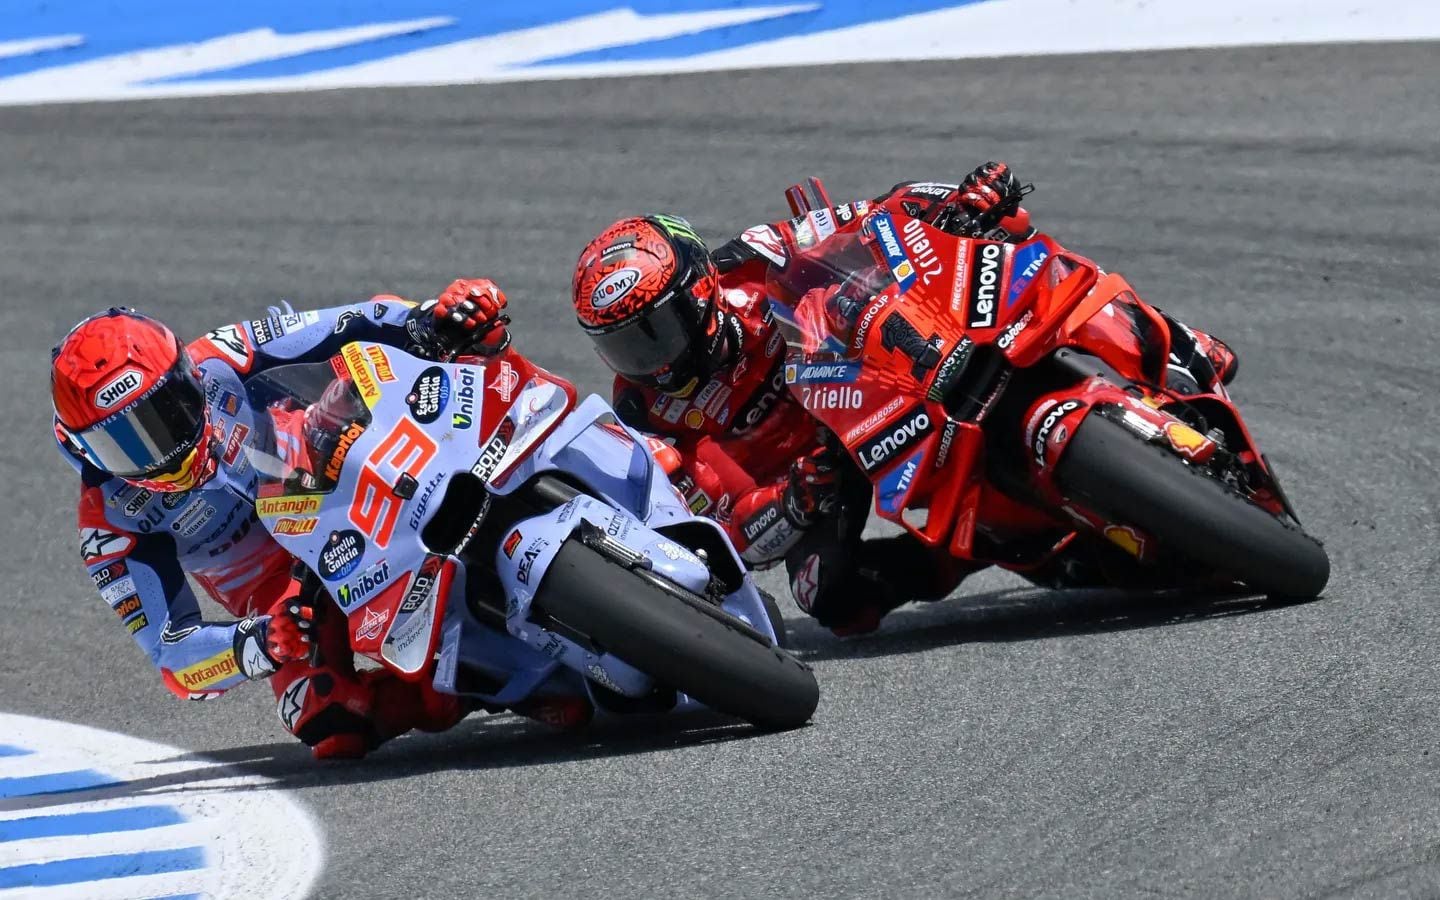 On Sunday, the battle for the win boiled down to Francesco Bagnaia and Marc Márquez.